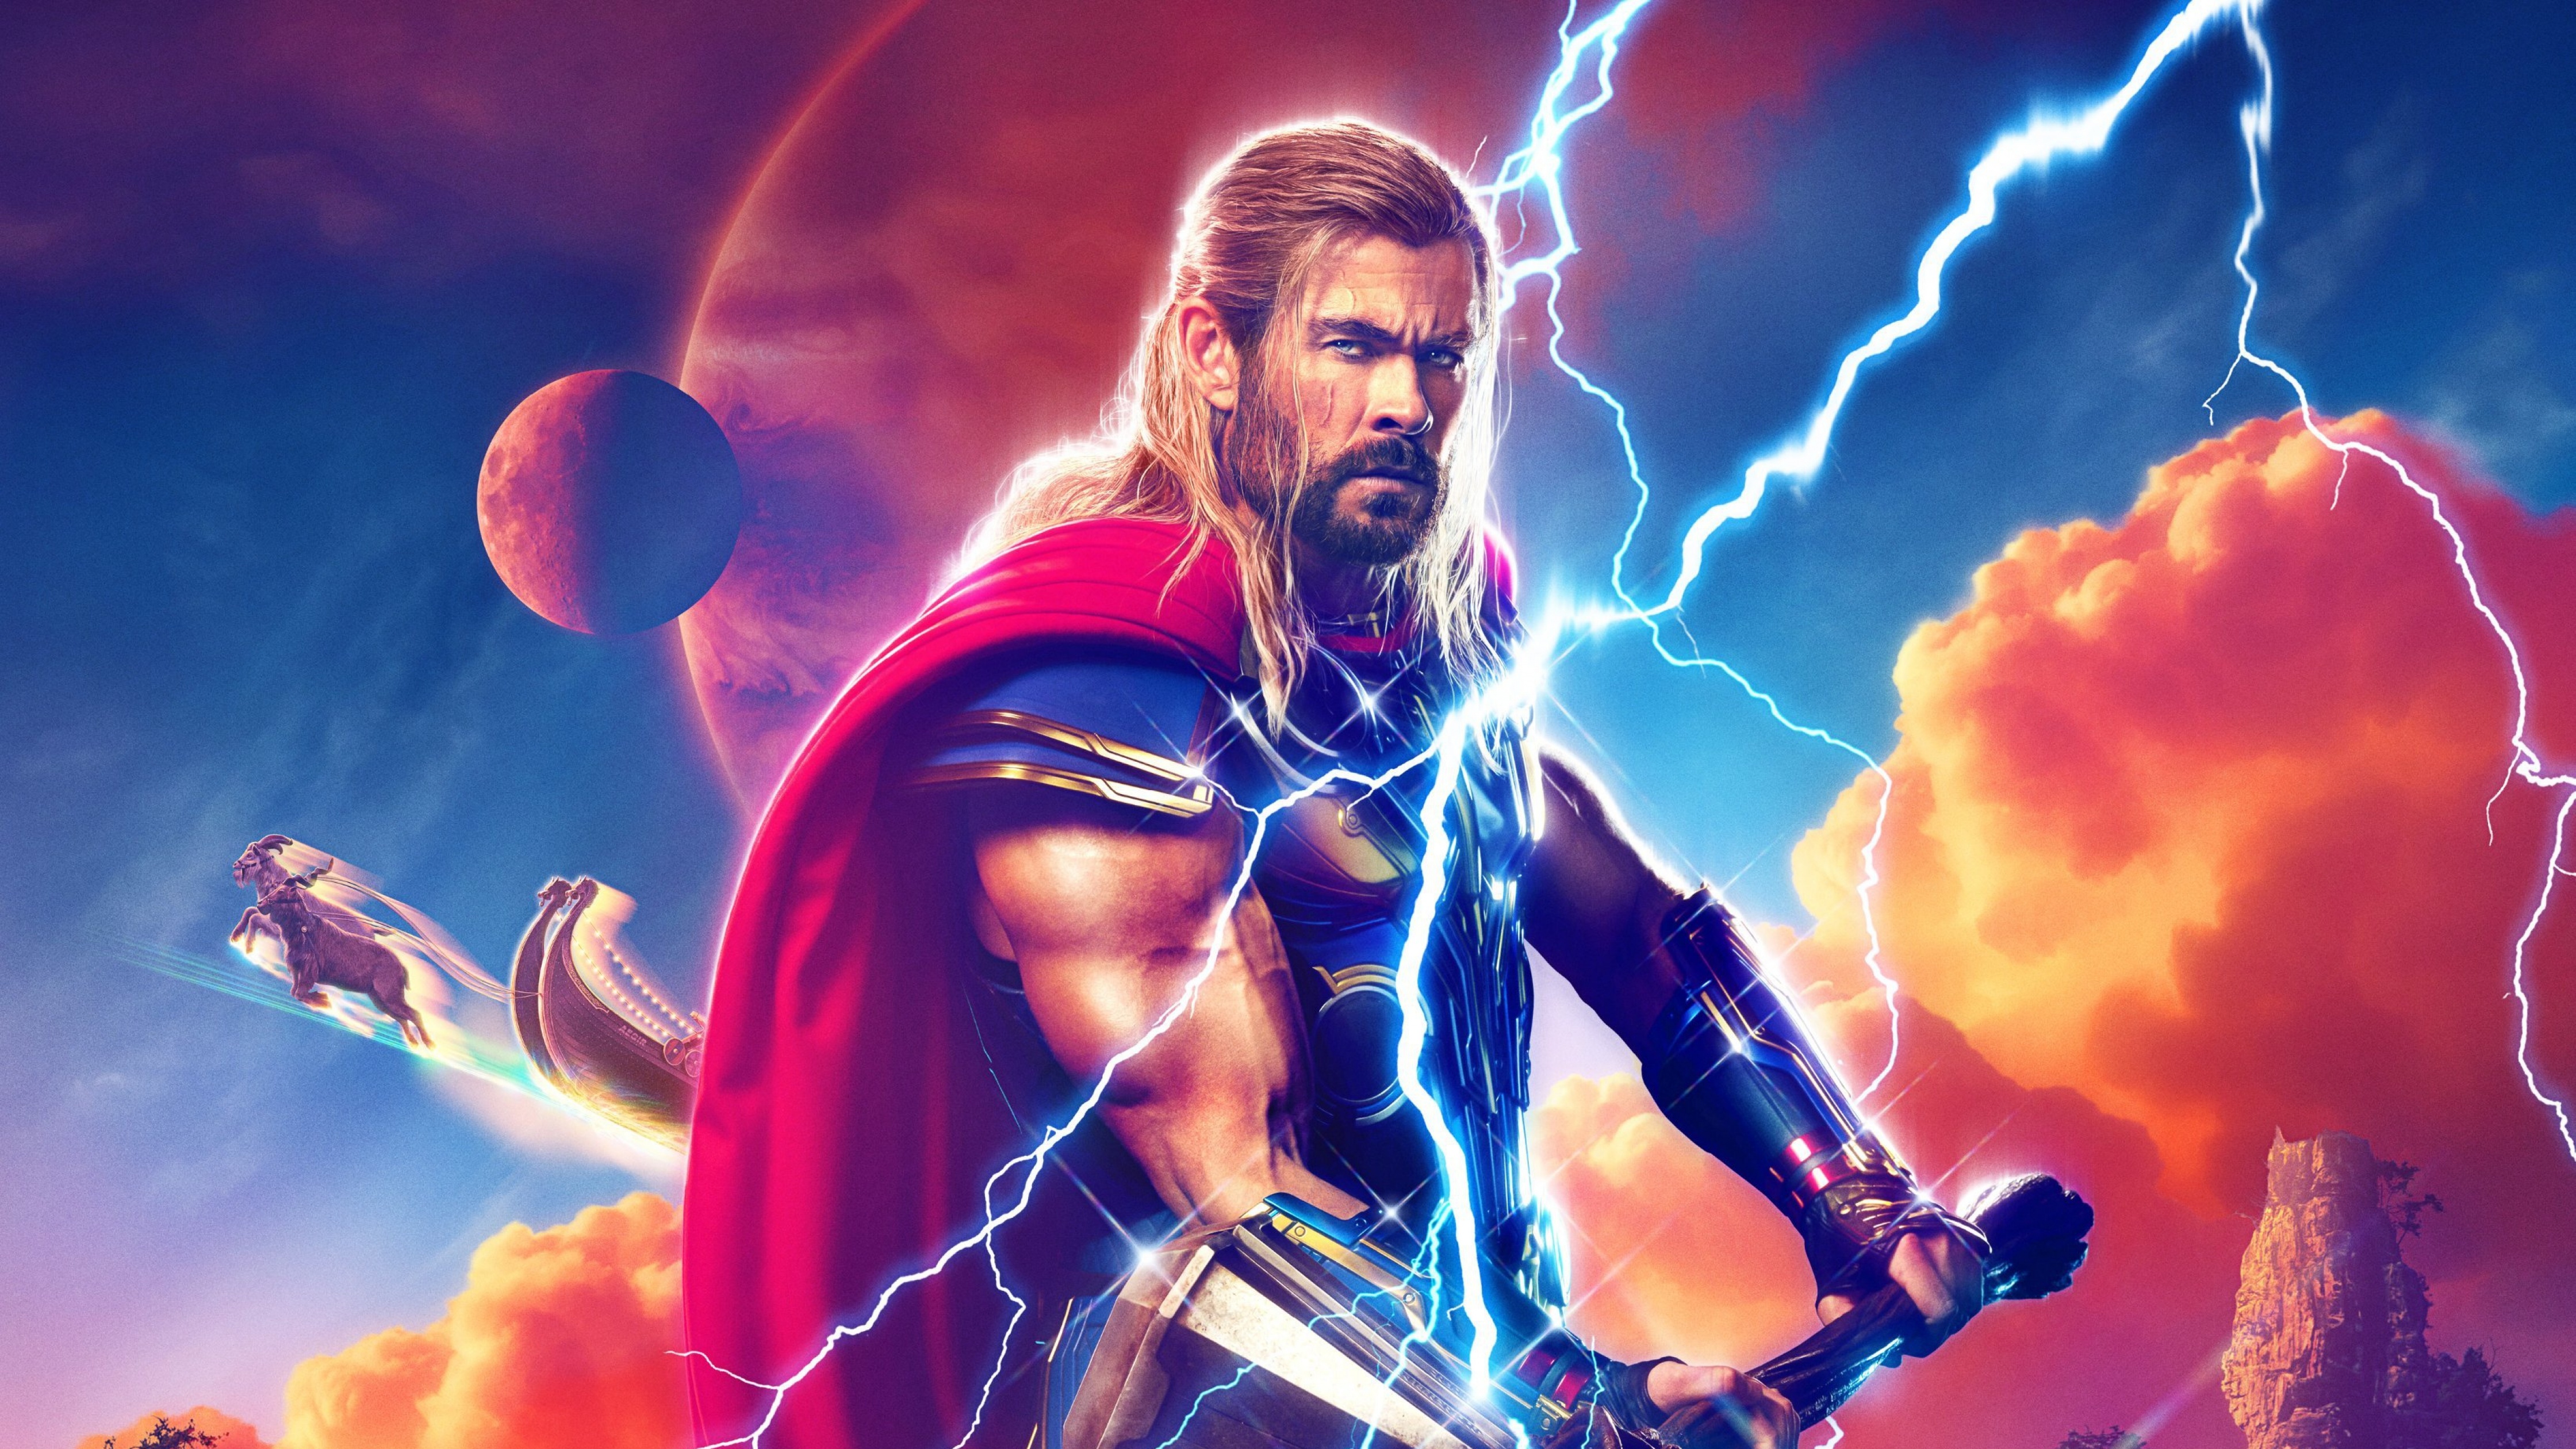 Wield the power of Love and Thunder with our Thor themed wallpapers